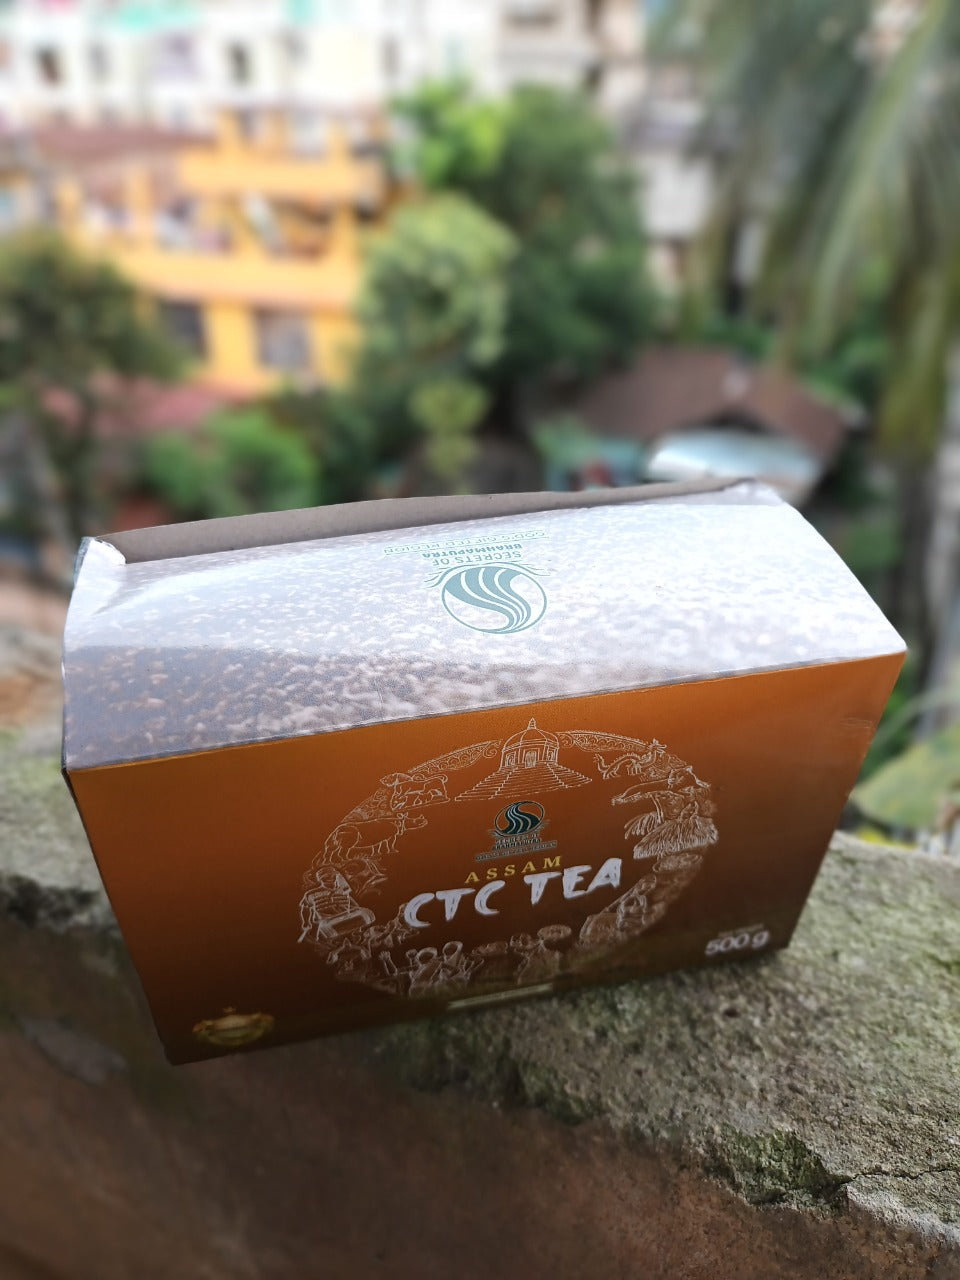 Image of Assam CTC Tea. Secrets of Brahmaputra Product Picture. Secrets of Brahmaputra sells natural, organic and healthy food that includes organic rice, spices, pickles, teas, bamboo products and other natural items.